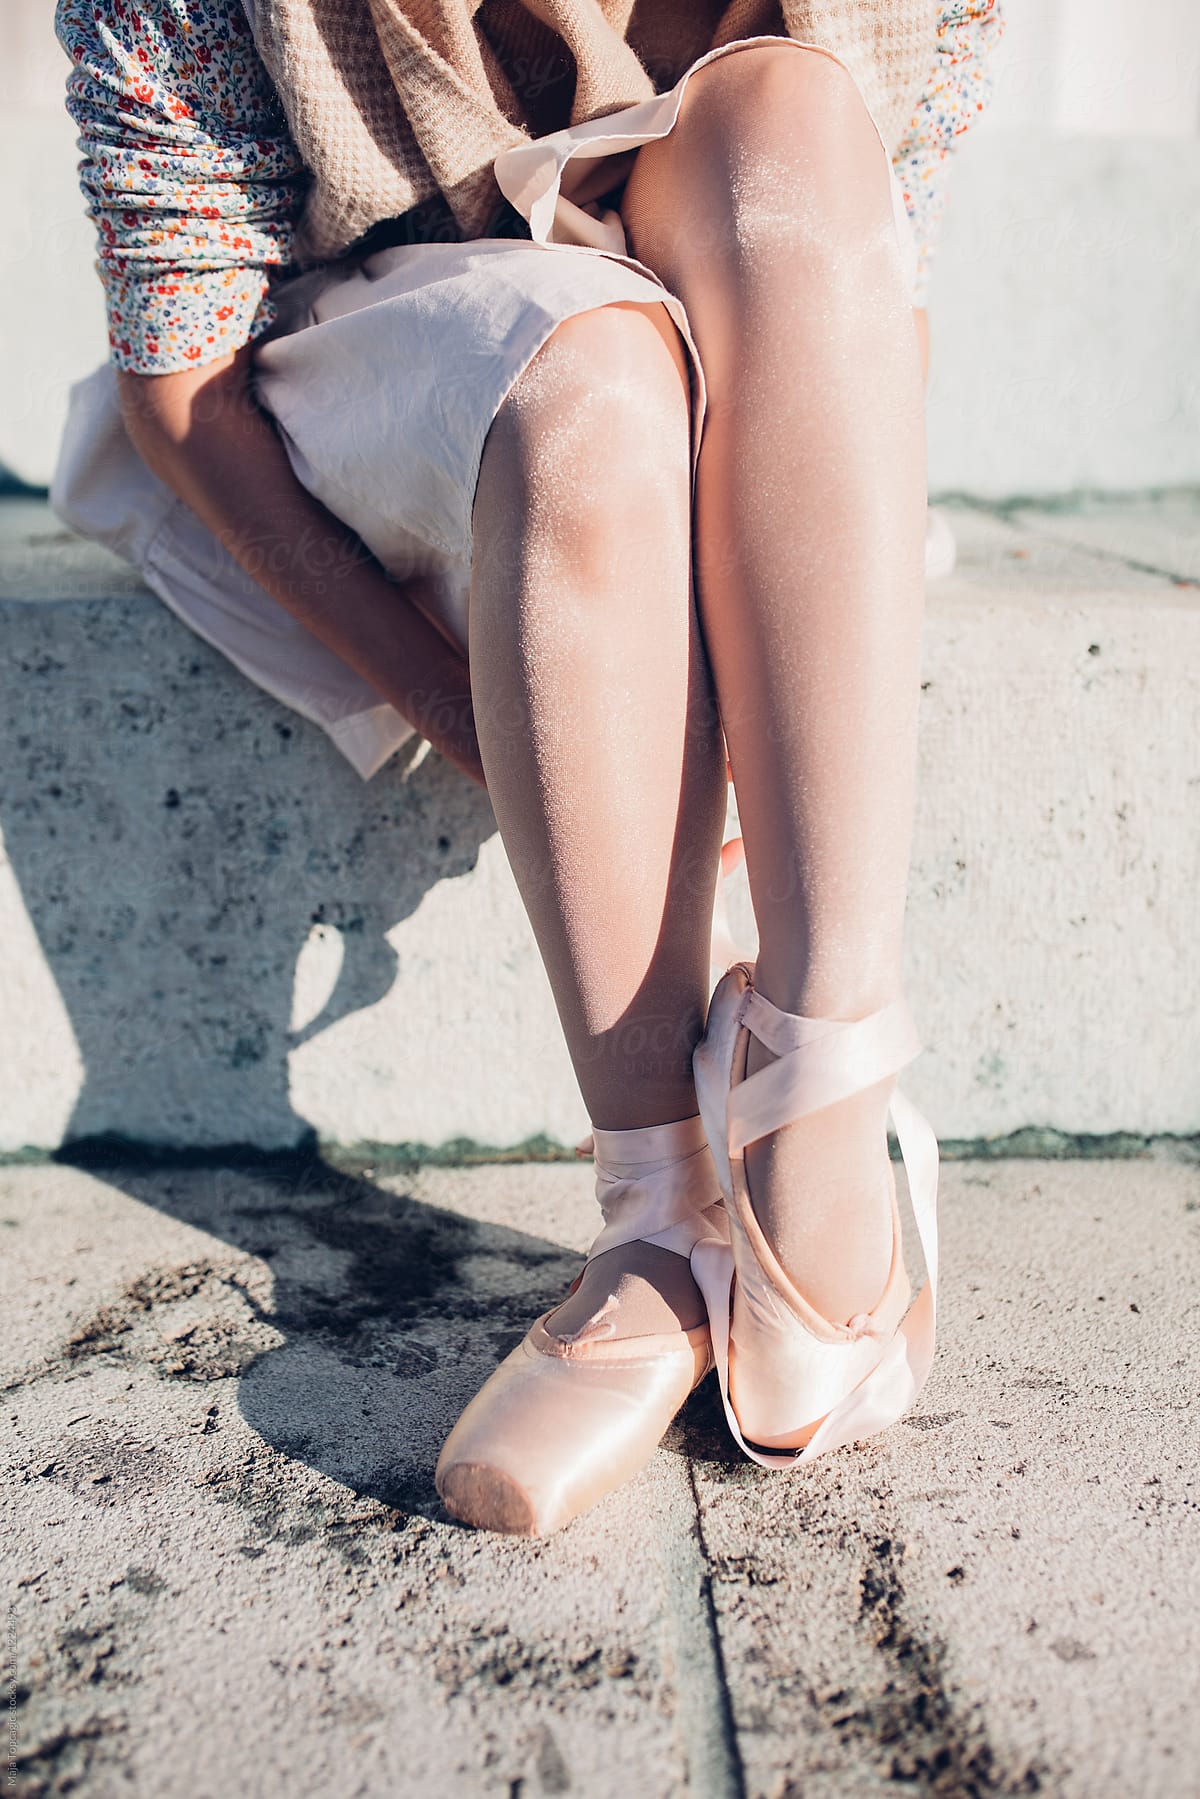 Ballerina putting on her ballet shoes